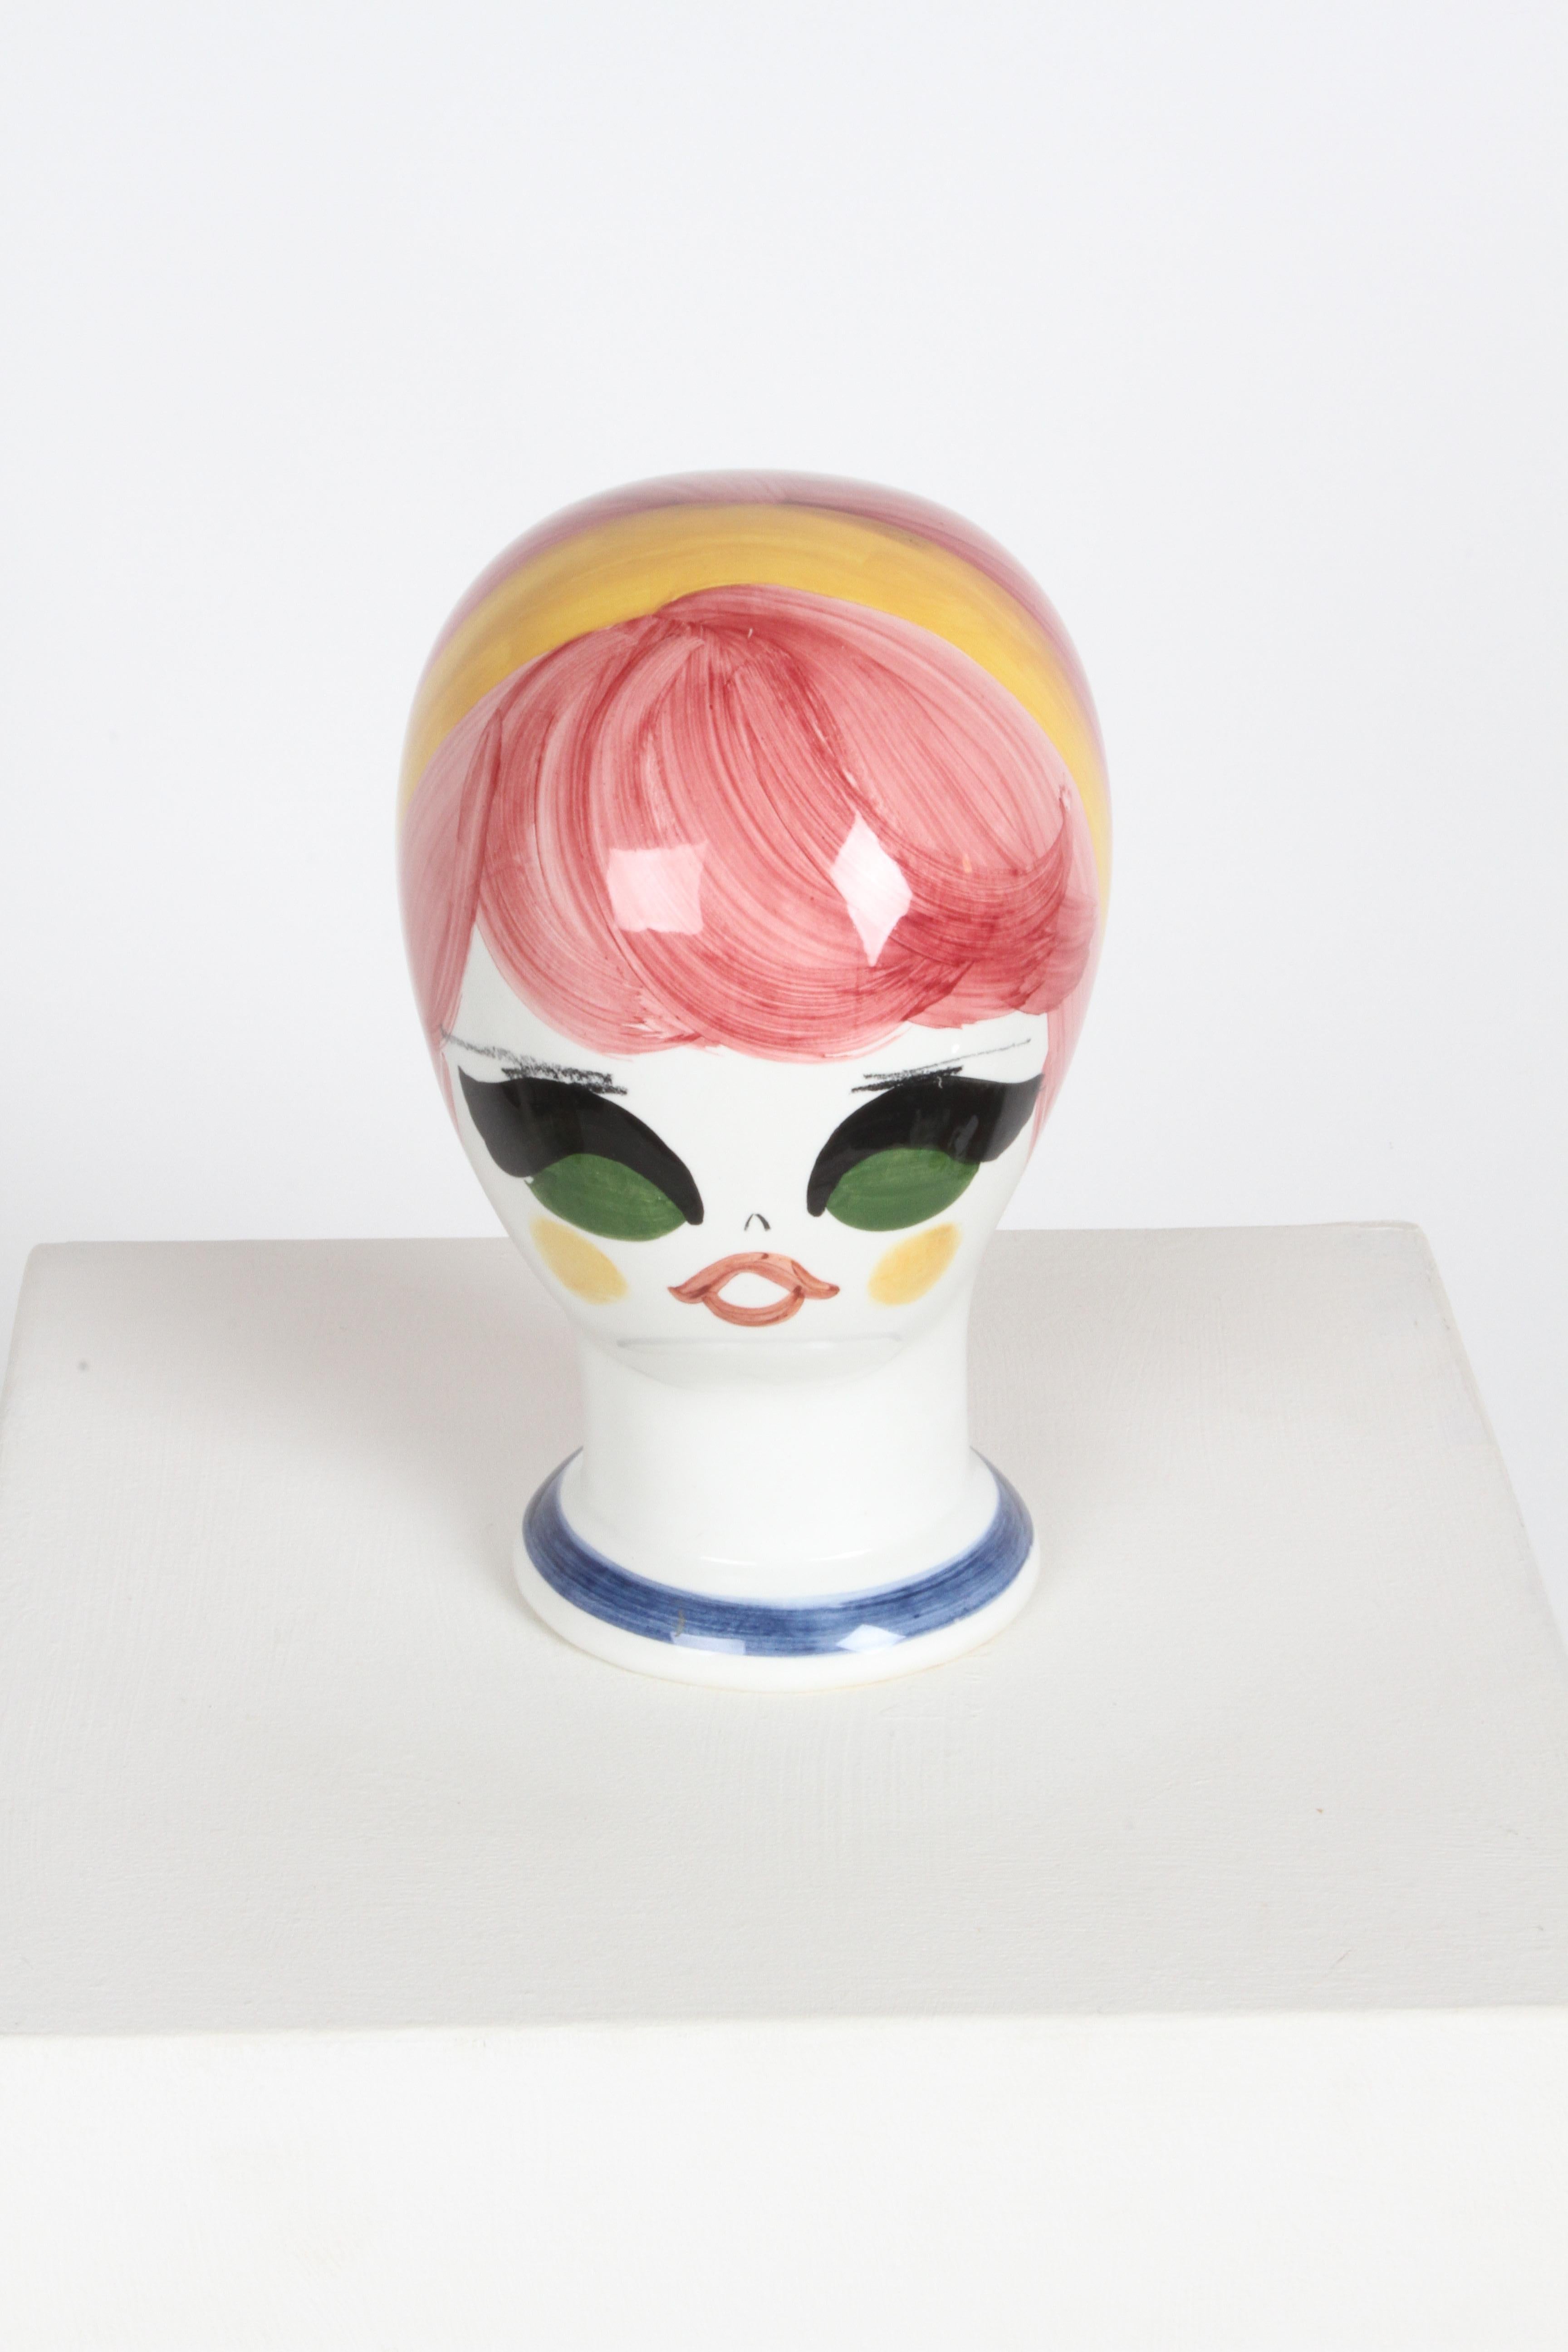 Whimsy MCM 1960s Italian hand painted female head for hats, wigs or a pure sculpture. Stamped to underside Coop Cer Art Quadrifoglio Florence Hand painted in Italy. In fine condition, no noted damage. Base is 4.5